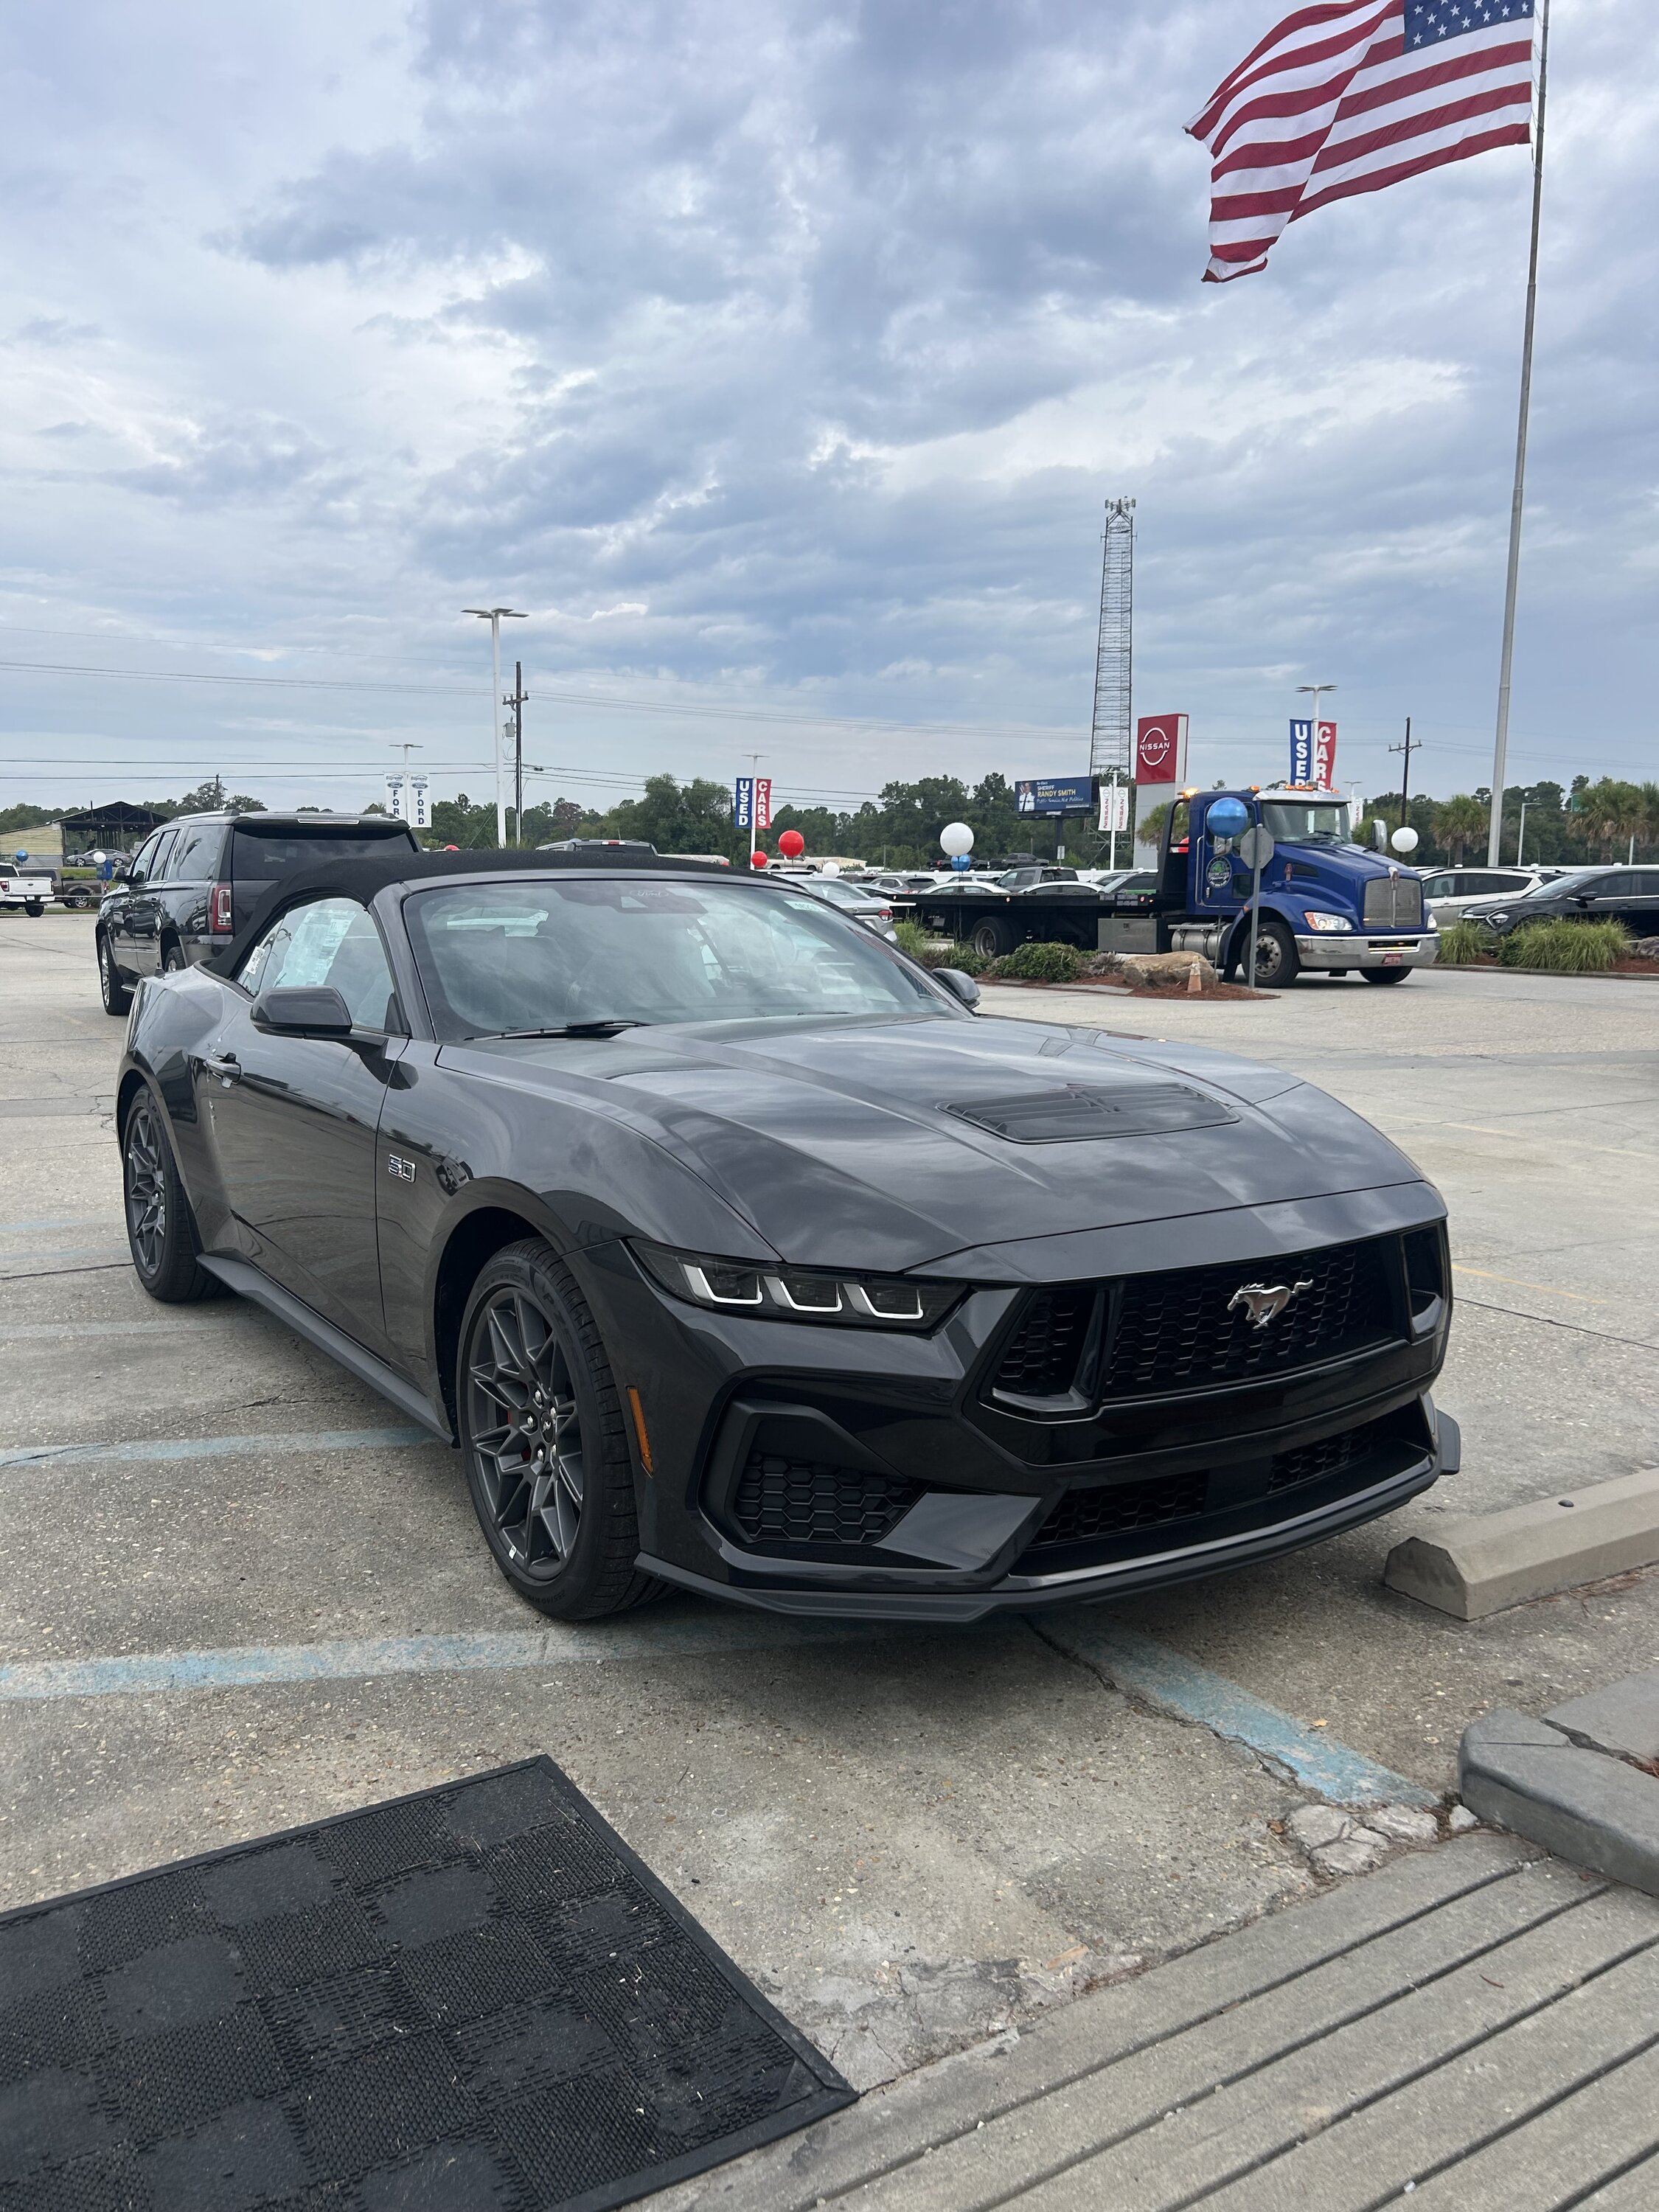 S650 Mustang Dark Matter Gray Convertible delivered IMG_1430